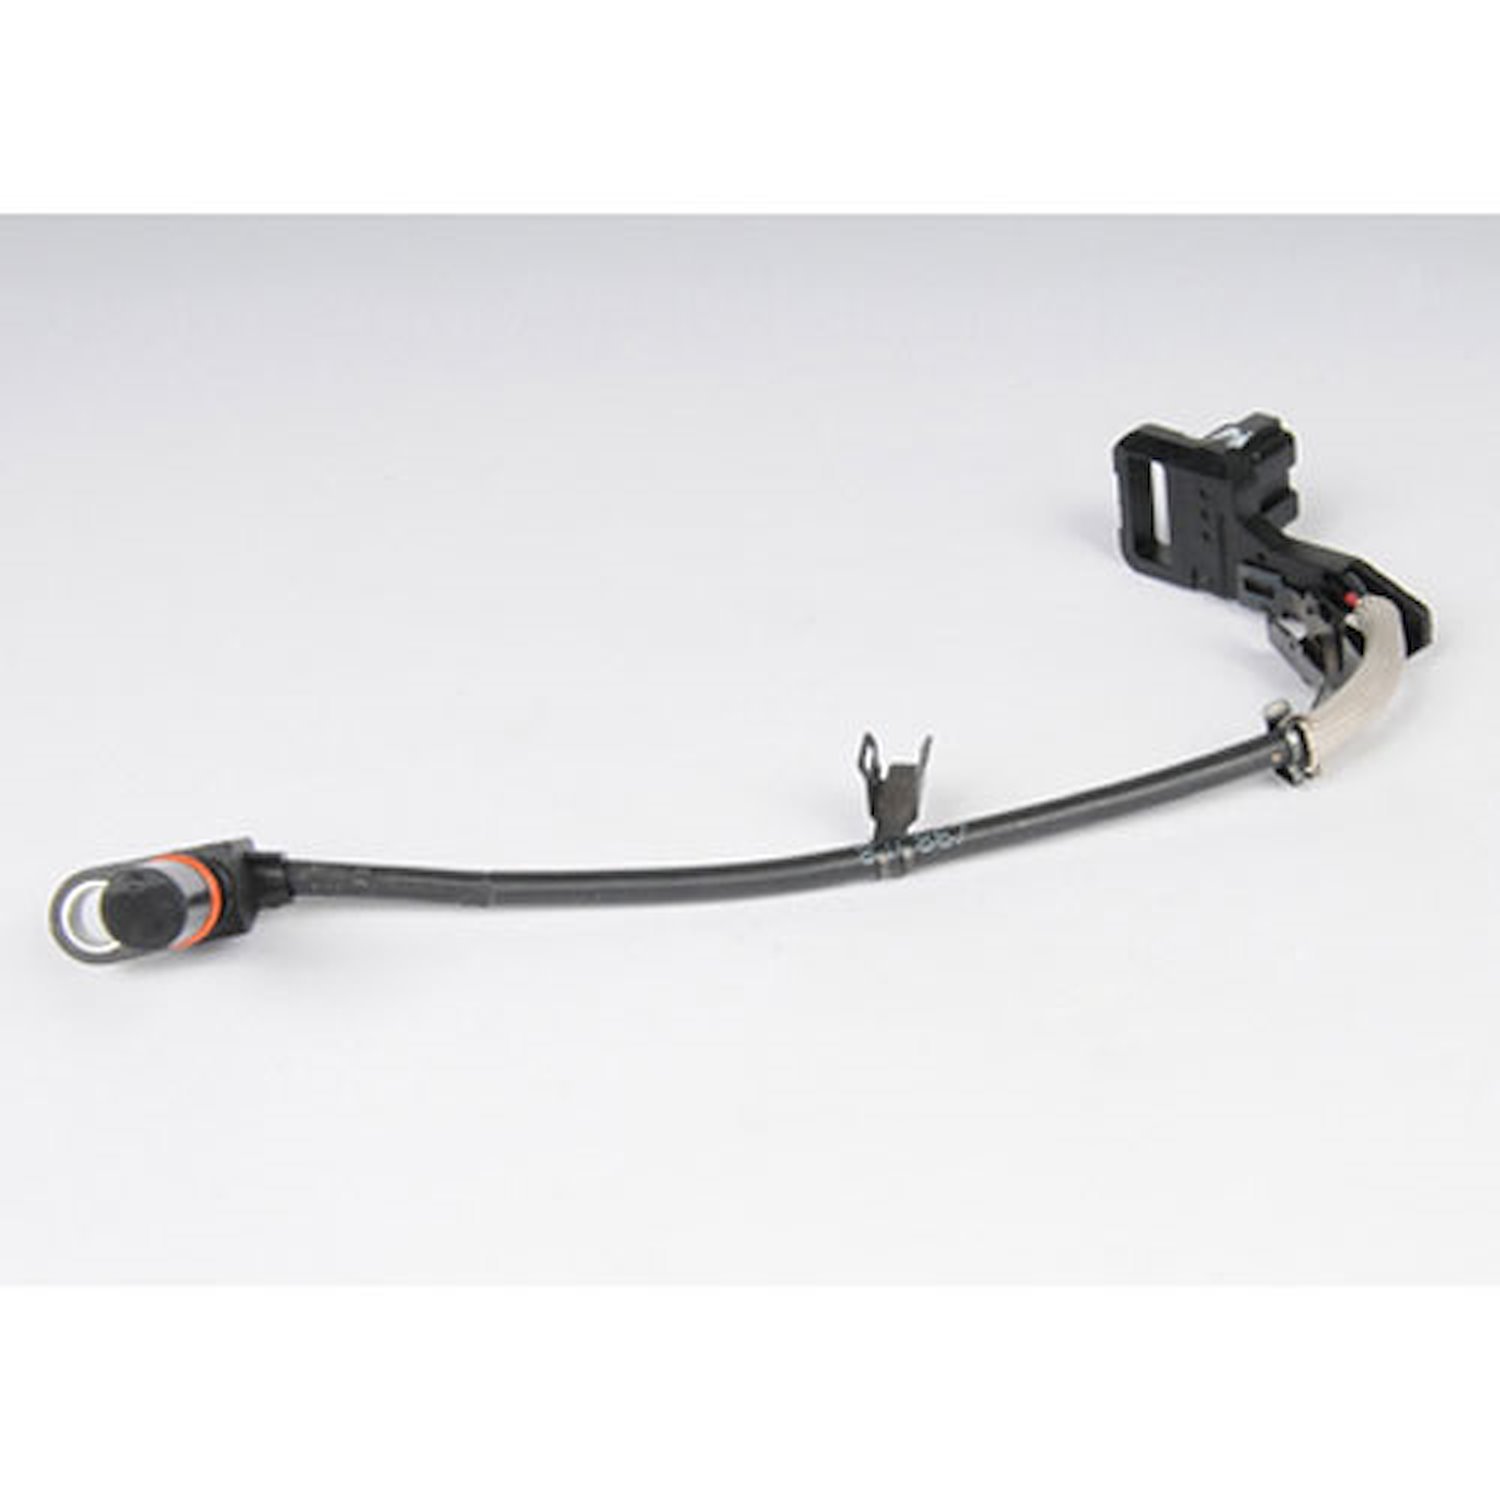 Automatic Transmission Speed Sensor for Select 2006-2014 Buick,